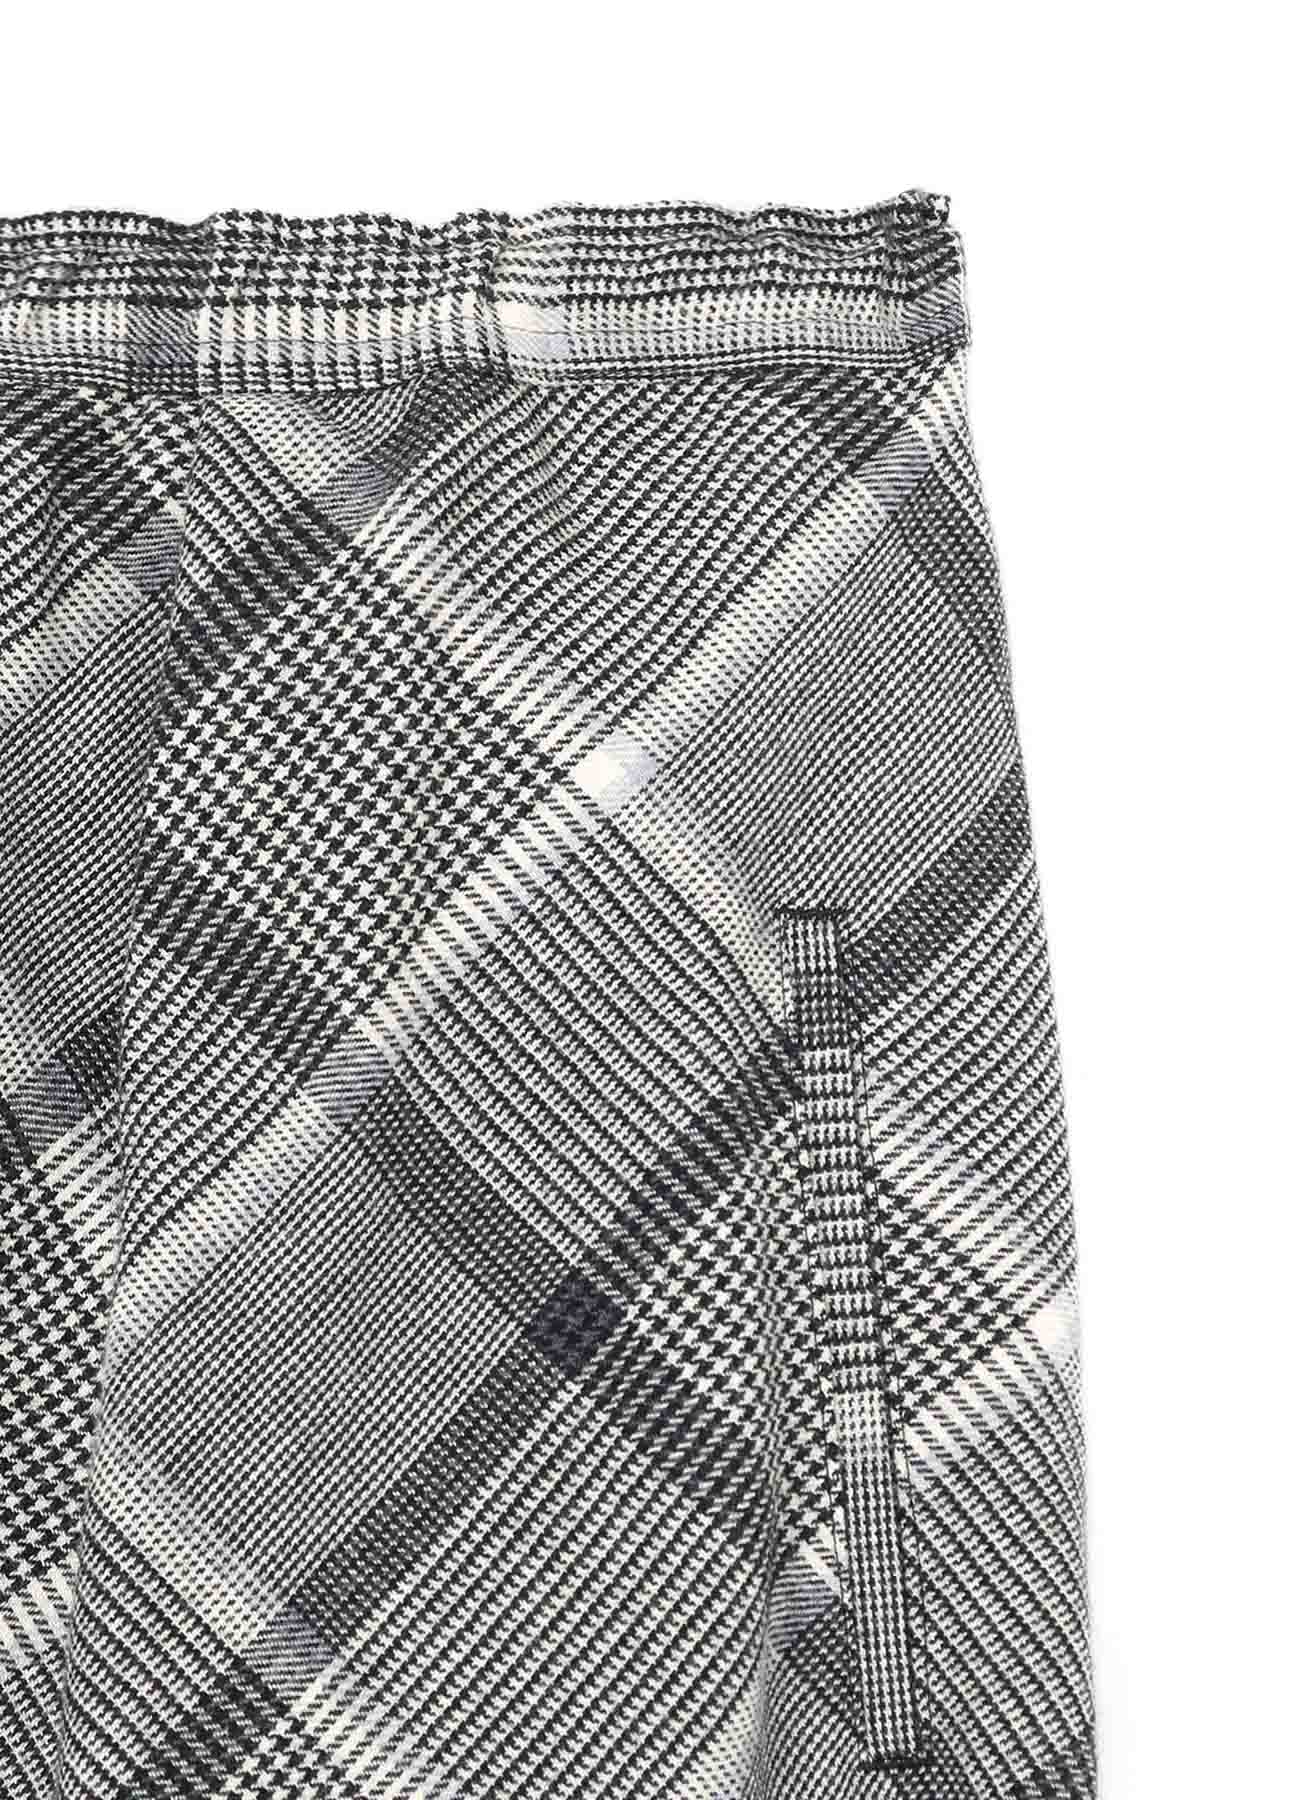 HOUNDSTOOTH CHECK WIDE LEG PLEATED PANTS